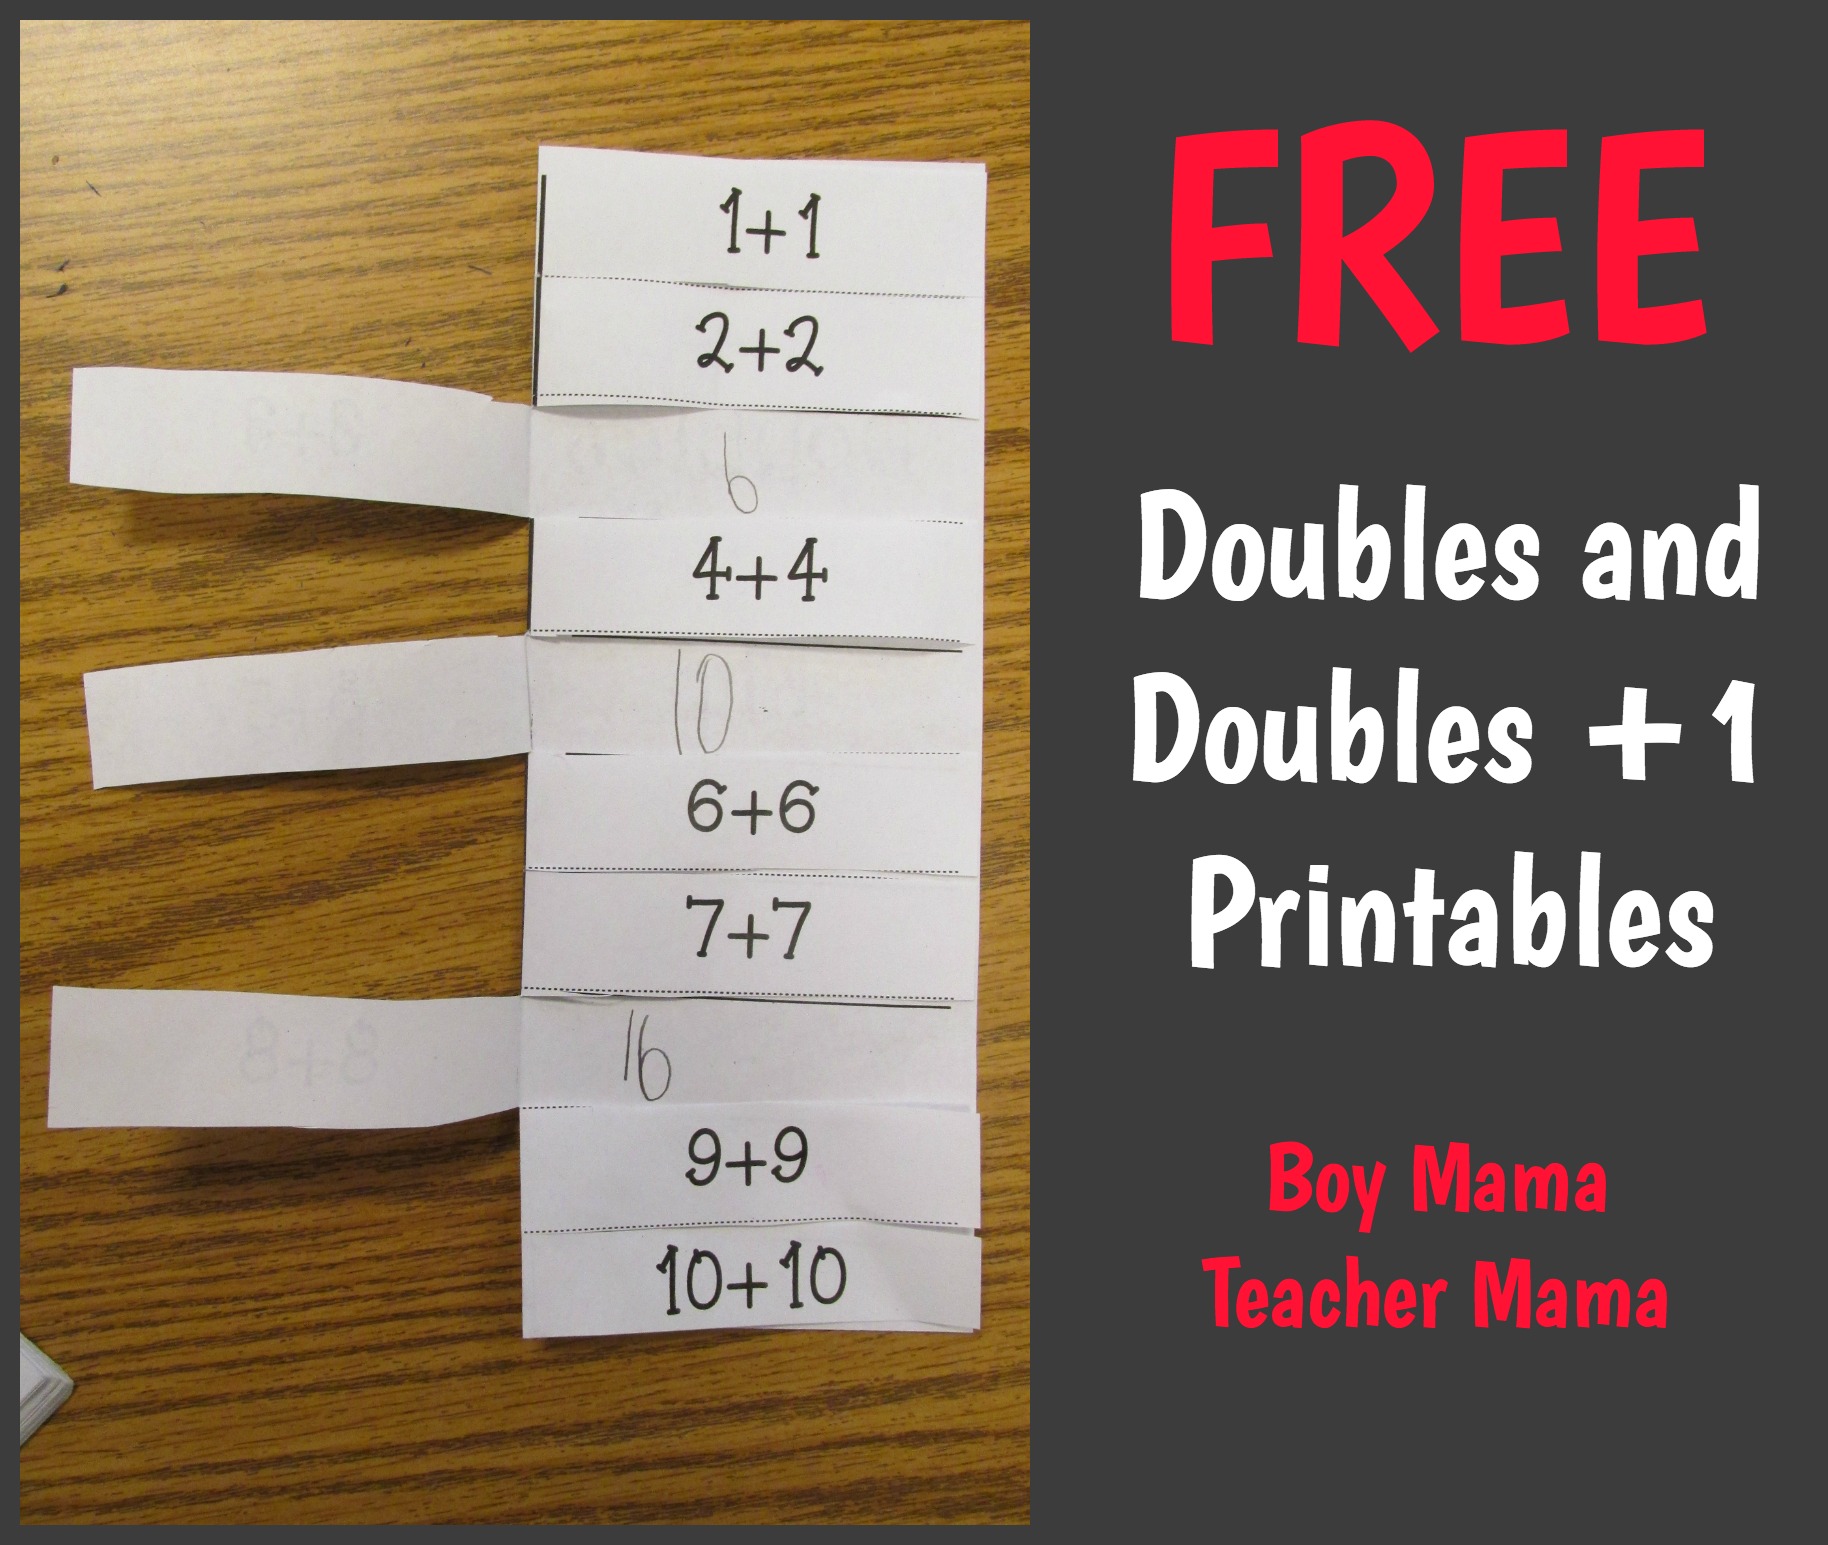 Boy Mama Teacher Mama FREE Doubles and Doubles +1 Printables (featured)